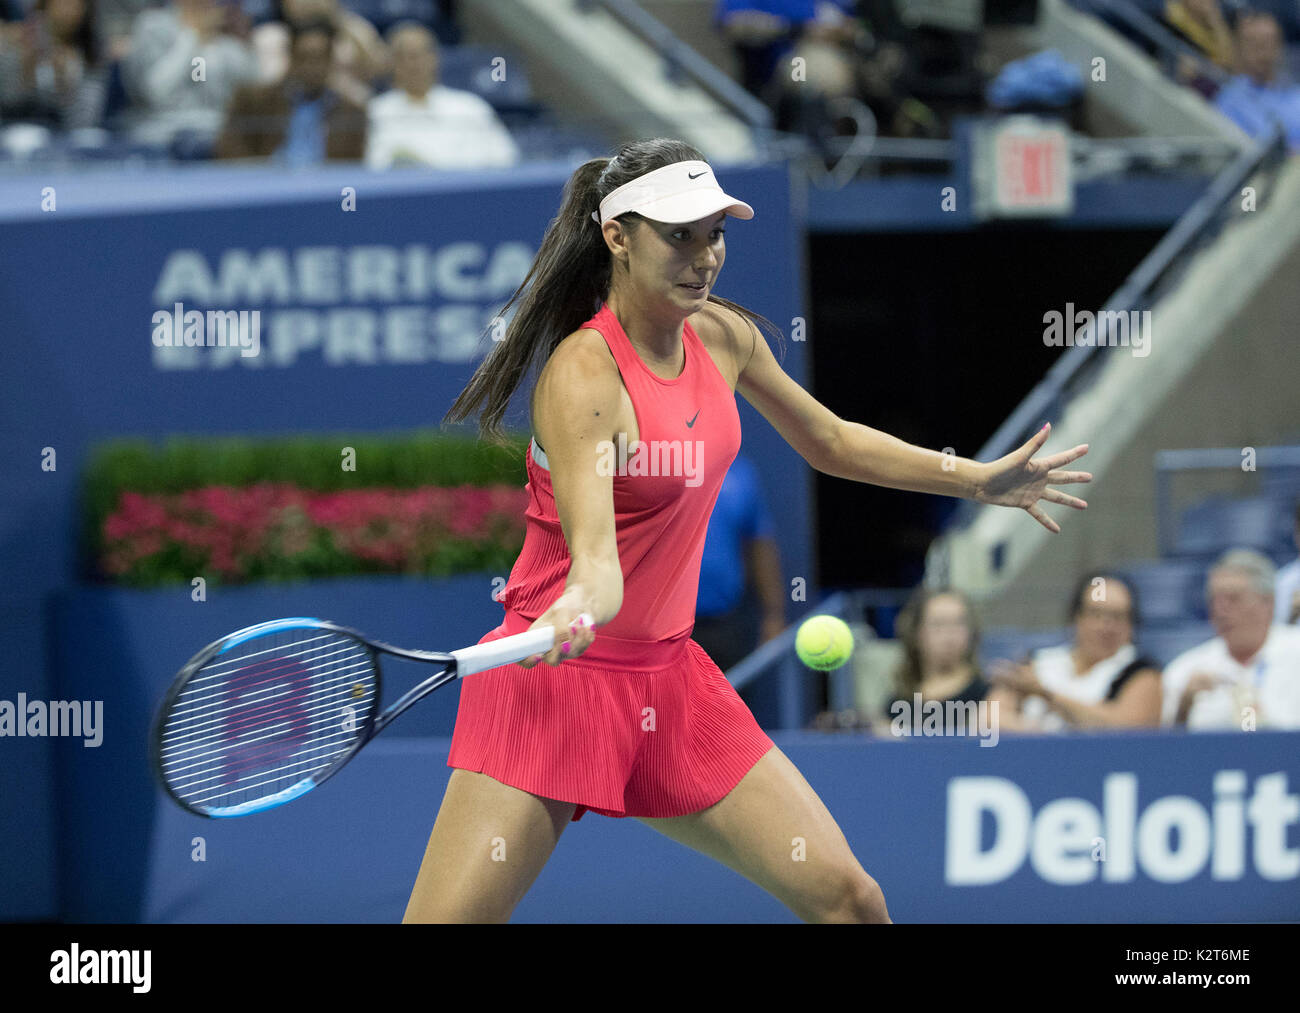 New York, United States. 30th Aug, 2017. Oceane Dodin of France returns ball during match against Venus Williams of USA at US Open Championships at Billie Jean King National Tennis Center Credit: Lev Radin/Pacific Press/Alamy Live News Stock Photo